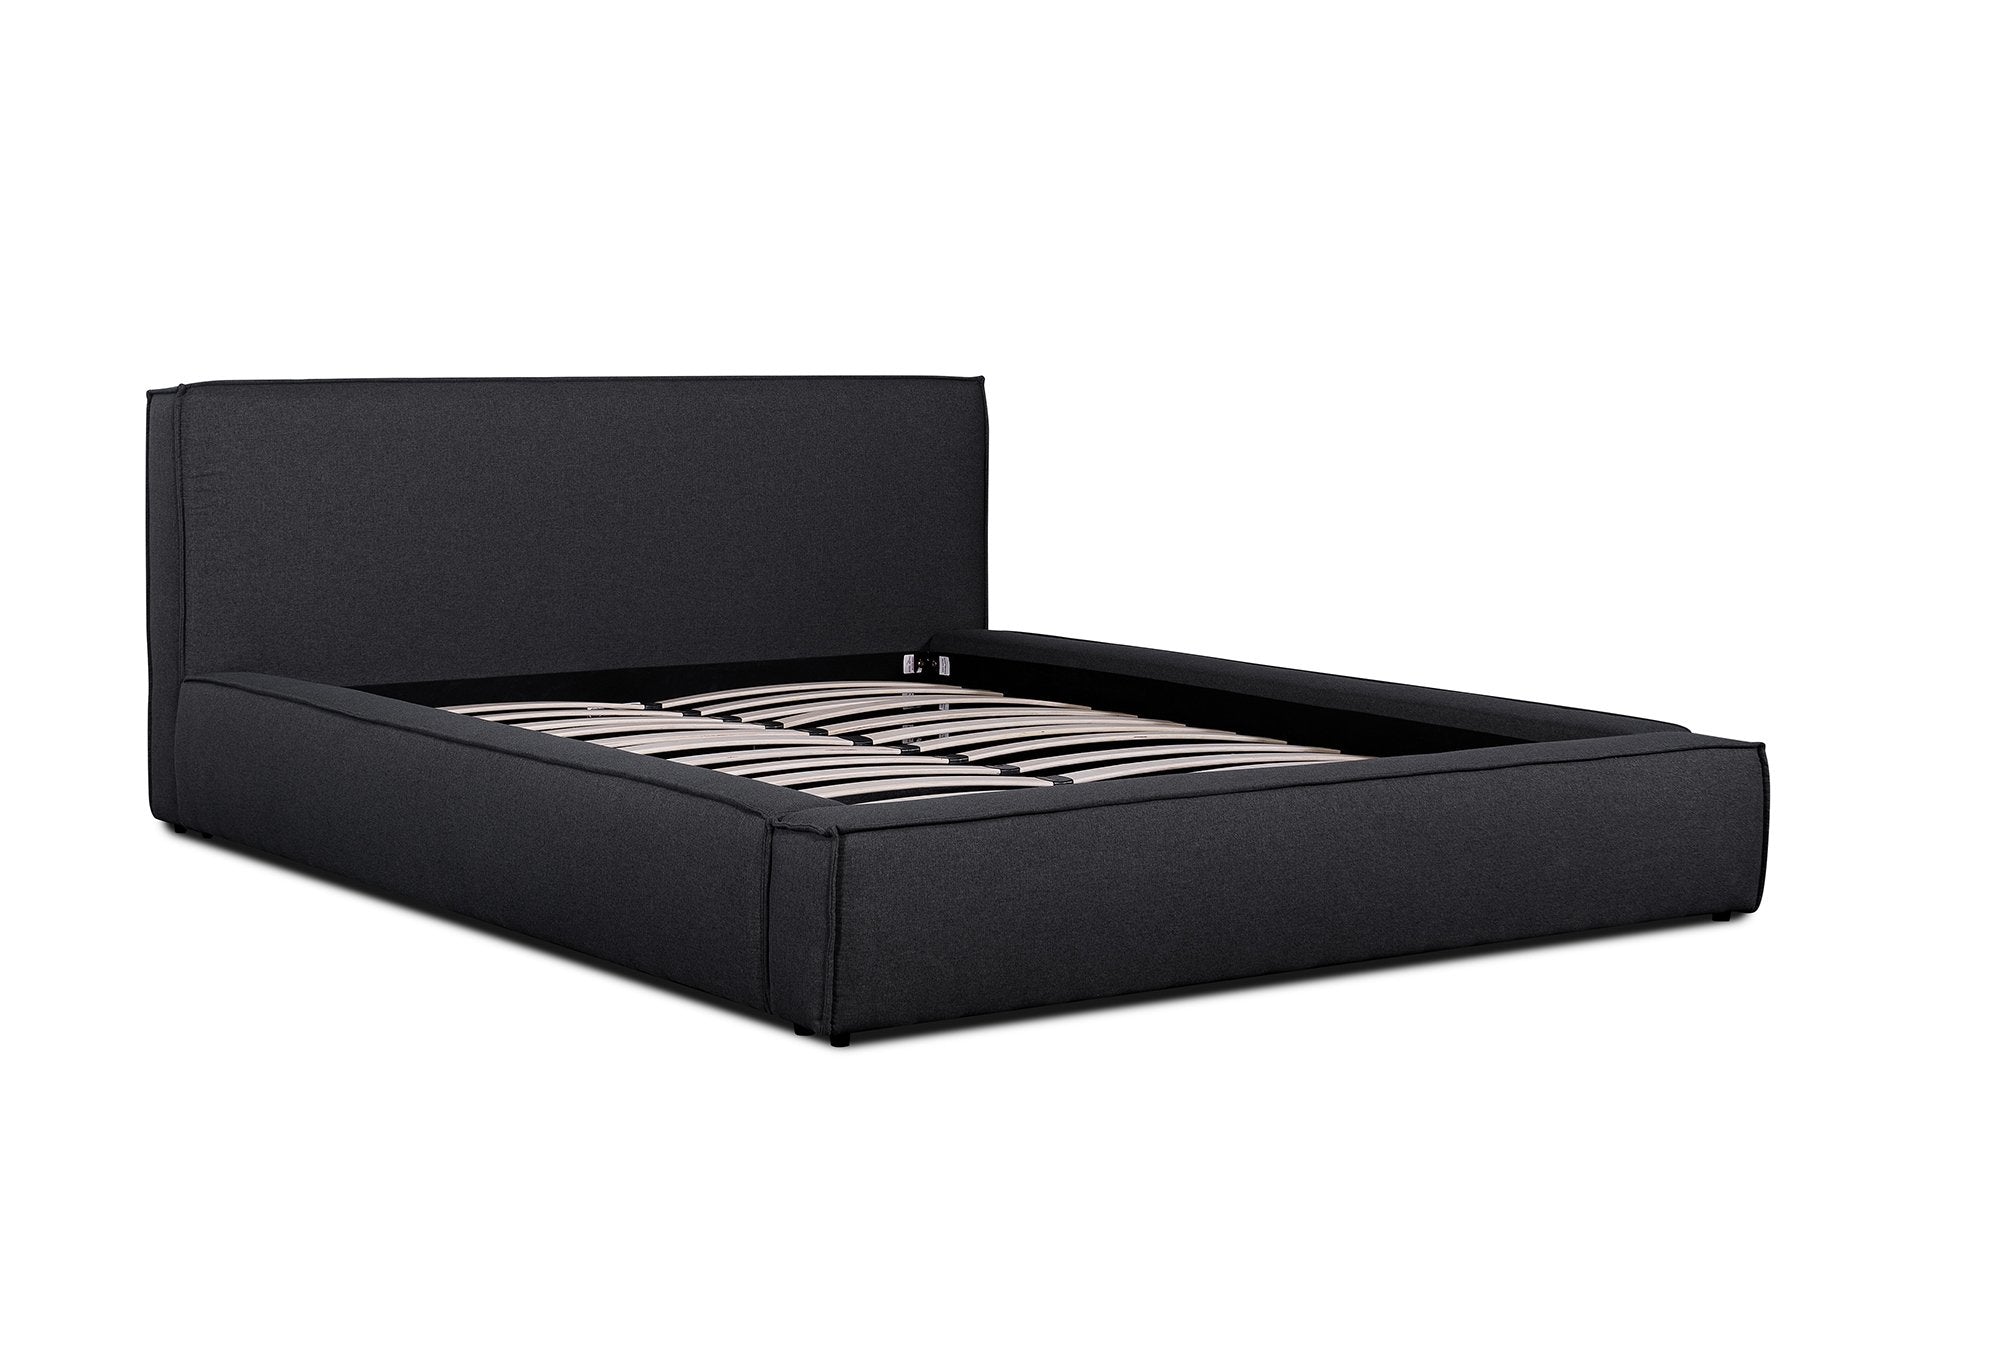 Samantha - Queen Bed frame in Fossil Grey Fabric